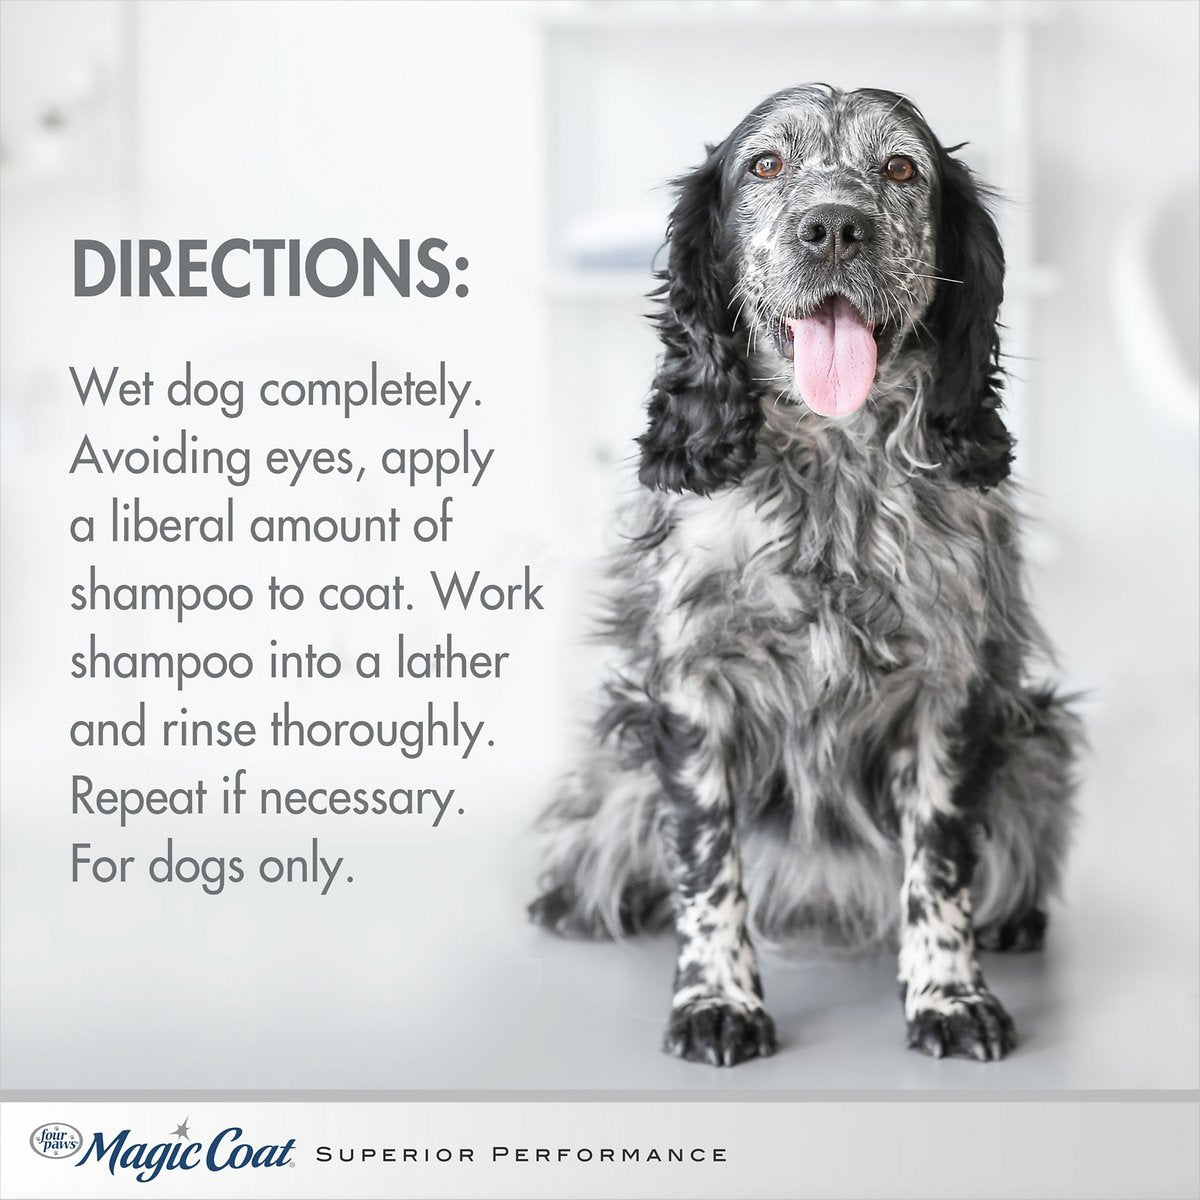 Canine's World Dog Shampoos Four Paws 2 in 1 Dog Shampoo and Conditioner Four Paws